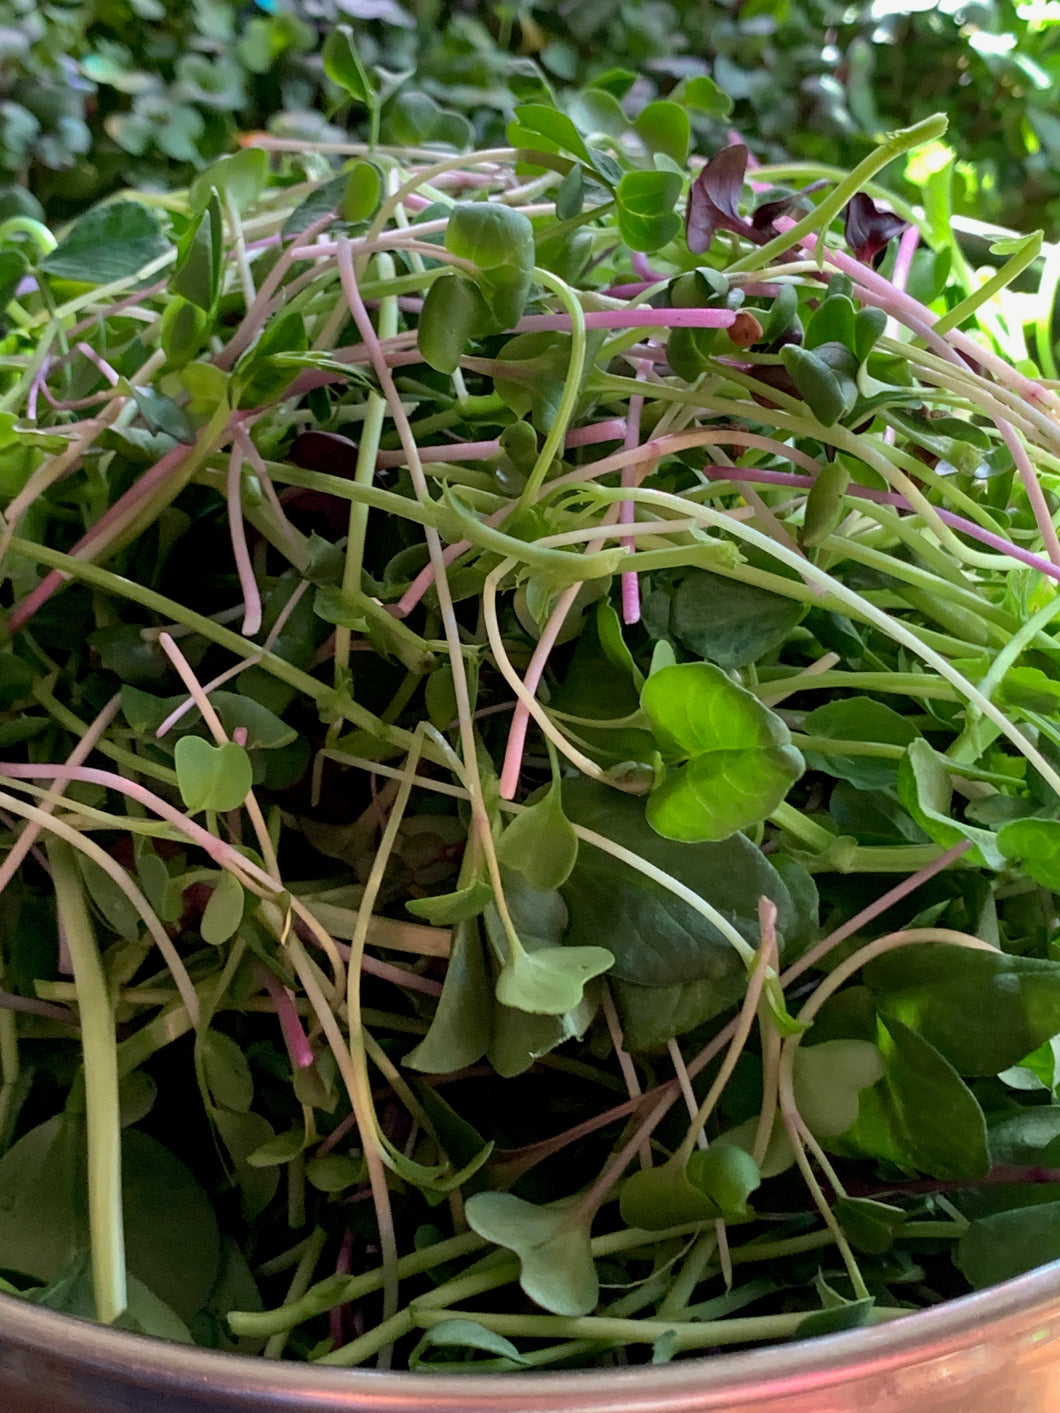 Option B - Free Climb CSA Membership - Stress Buster Microgreen Salad Mix - 3 oz container - You can add this item to any CSA membership or order it alone - Sky Pilot Farm CSA Pick-up <br> This is our most popular item!